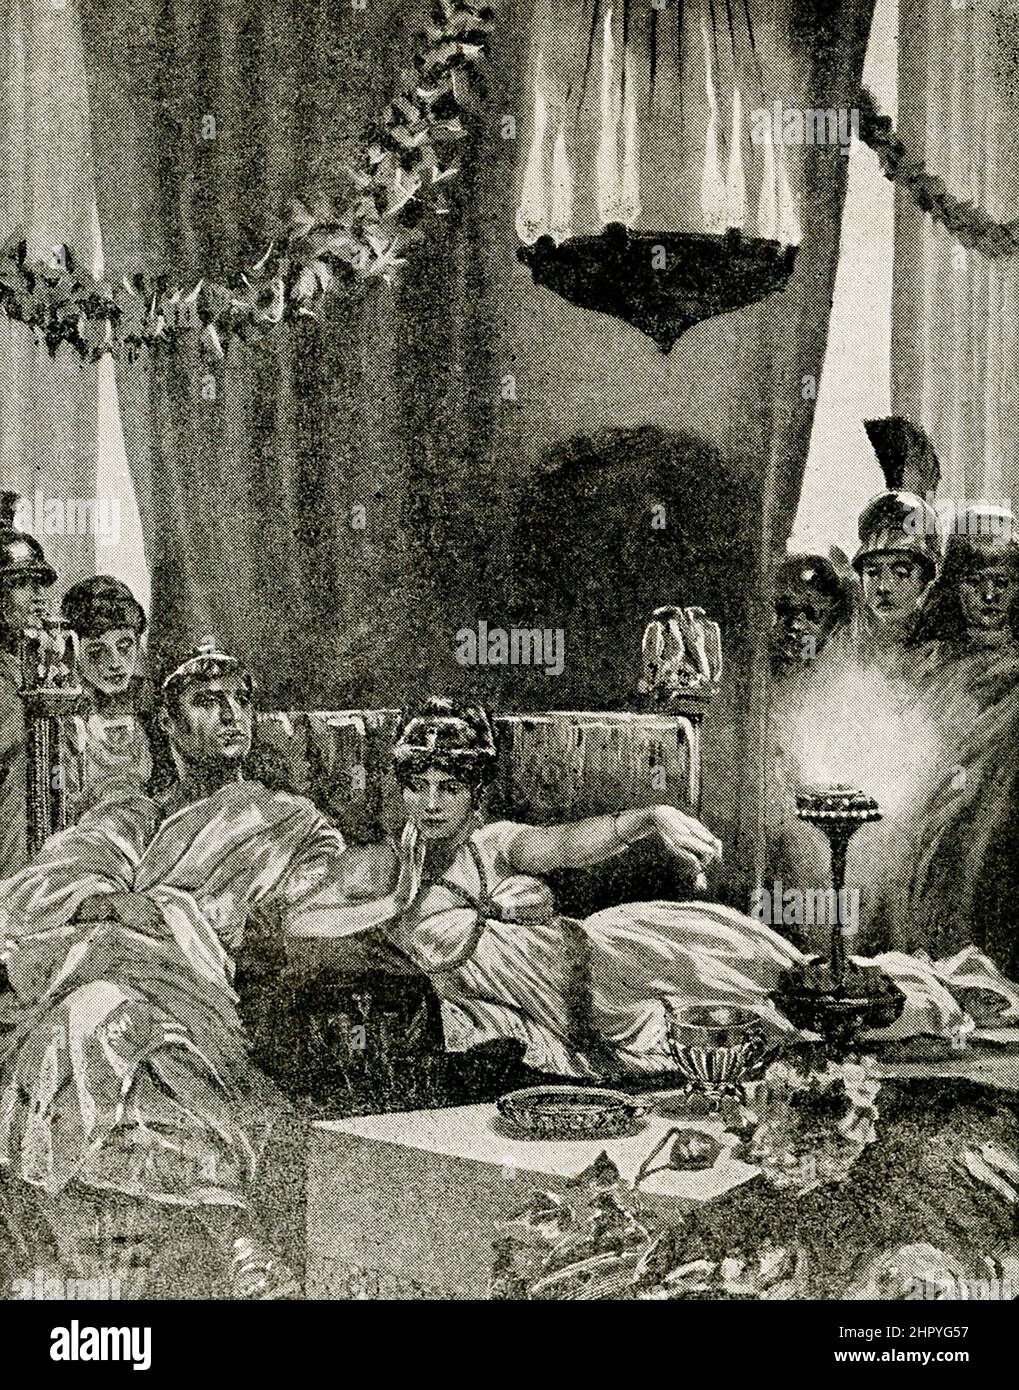 This 1912 images shows Cleopatra dropping a pearl into a golblet of wine. The Roman writer Pliny the Elder, in his Natural History, told of Cleopatra betting Marc Antony that she could host the most expensive dinner in history. To impress Antony and the Roman Empire he represented with the extent of Egypt’s wealth., she crushed one large pearl from a pair of earrings and dissolved it in a goblet of wine (or vinegar), before gulping it down (the subject of this illustration.) Cleopatra VII (69-30 B.C.), the daughter of Ptolemy XI, of Egypt. She married her brother Ptolemy XII and began to rule Stock Photo